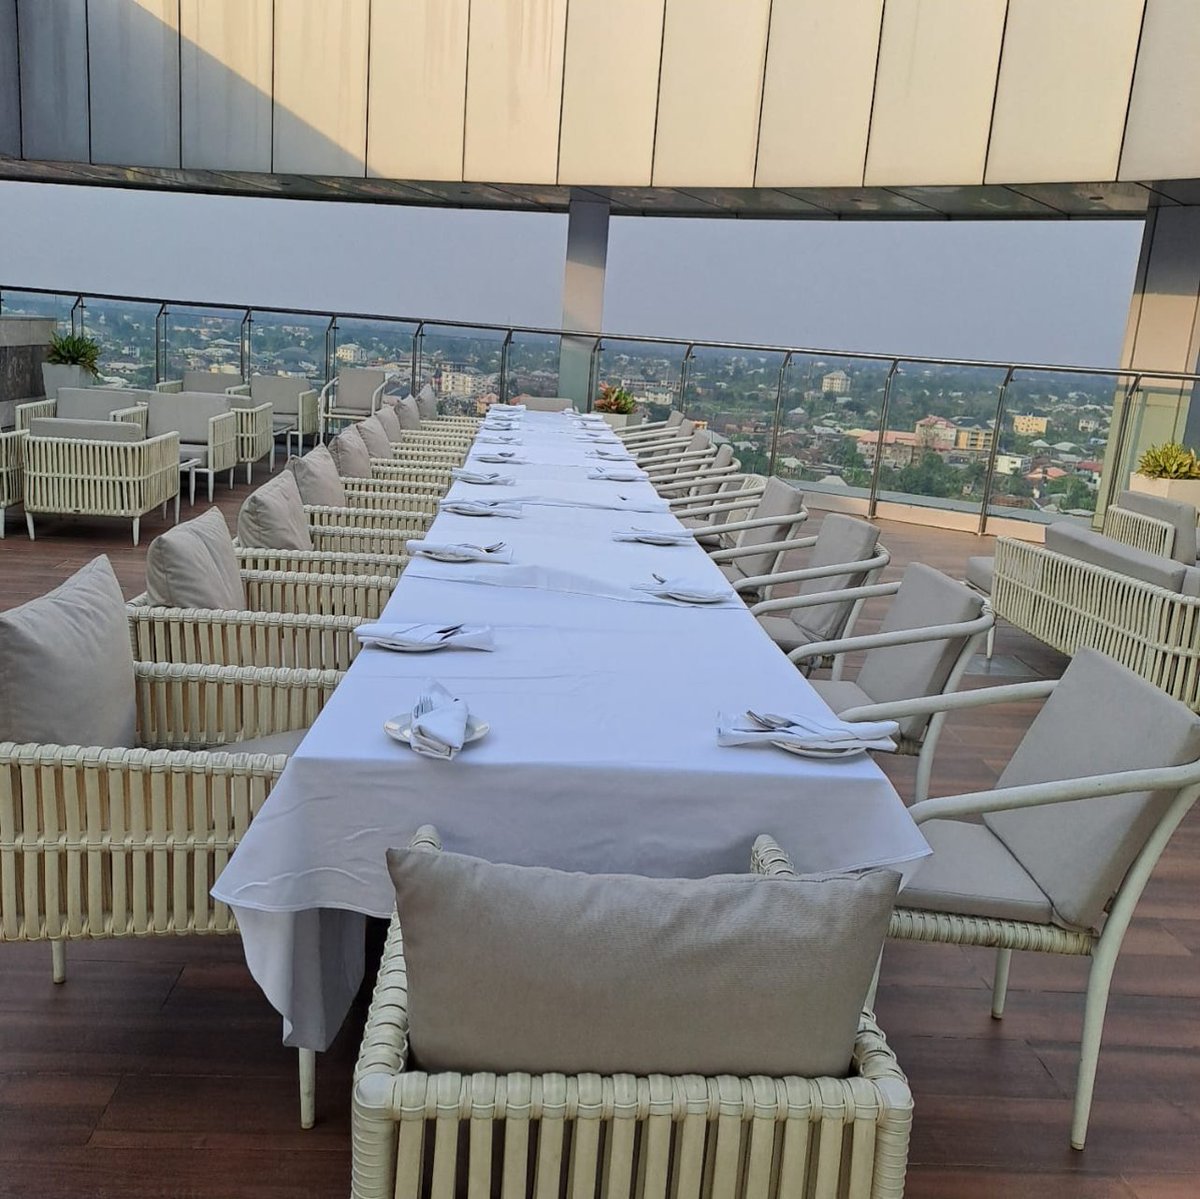 Are you planning an intimate celebration or anniversary party? Why not have it in our rooftop Sese Lounge. You are guaranteed beautiful views, great ambience and service. Call us now on 09062831404 to find out more. #rooftop #birthdayparties #bridalshowers